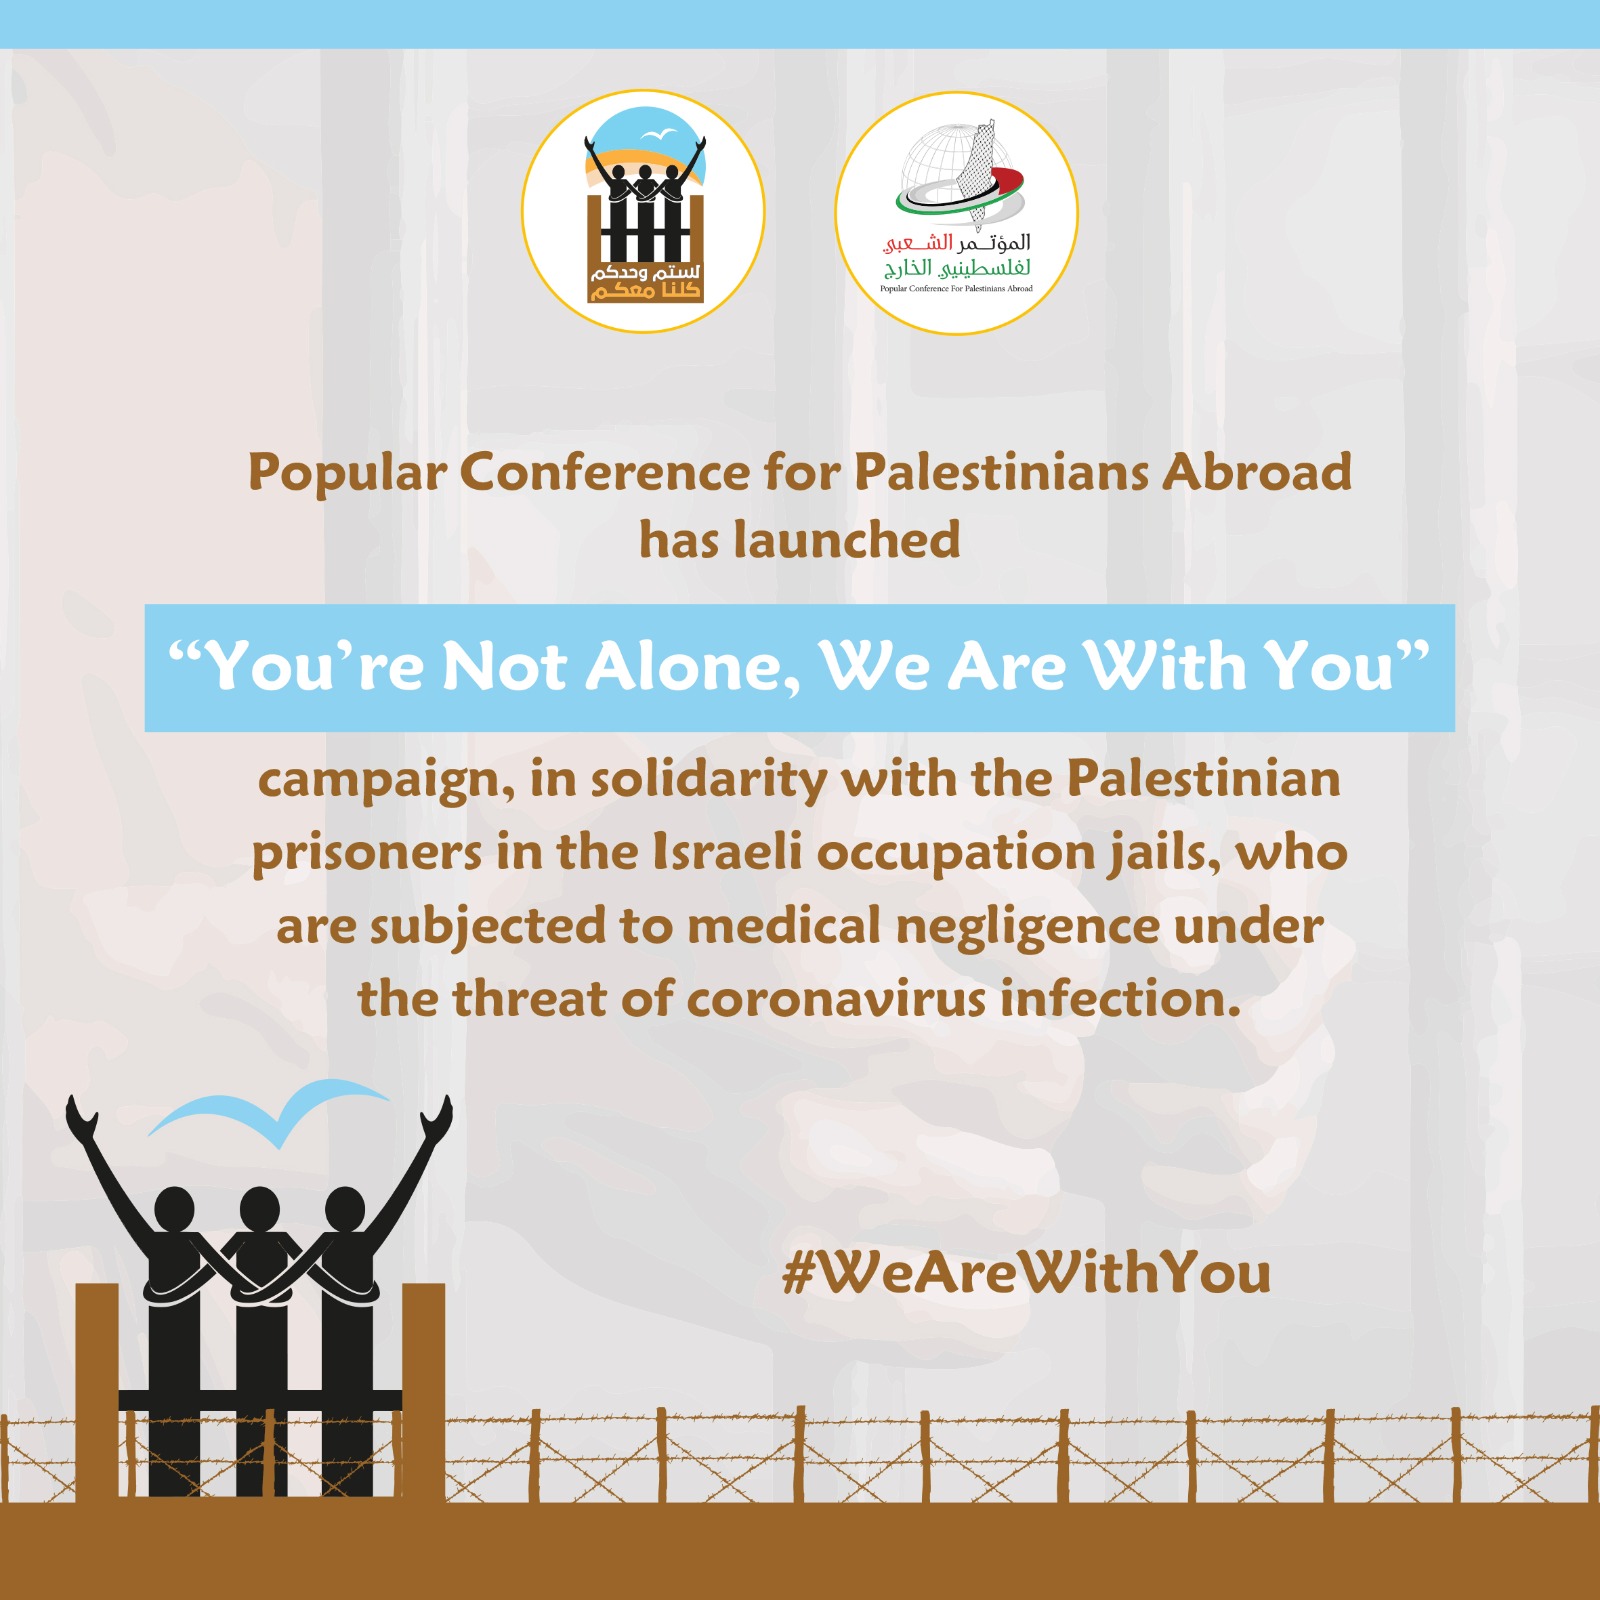 Launching of “You Are Not Alone, We Are With You” Campaign in Solidarity with Prisoners